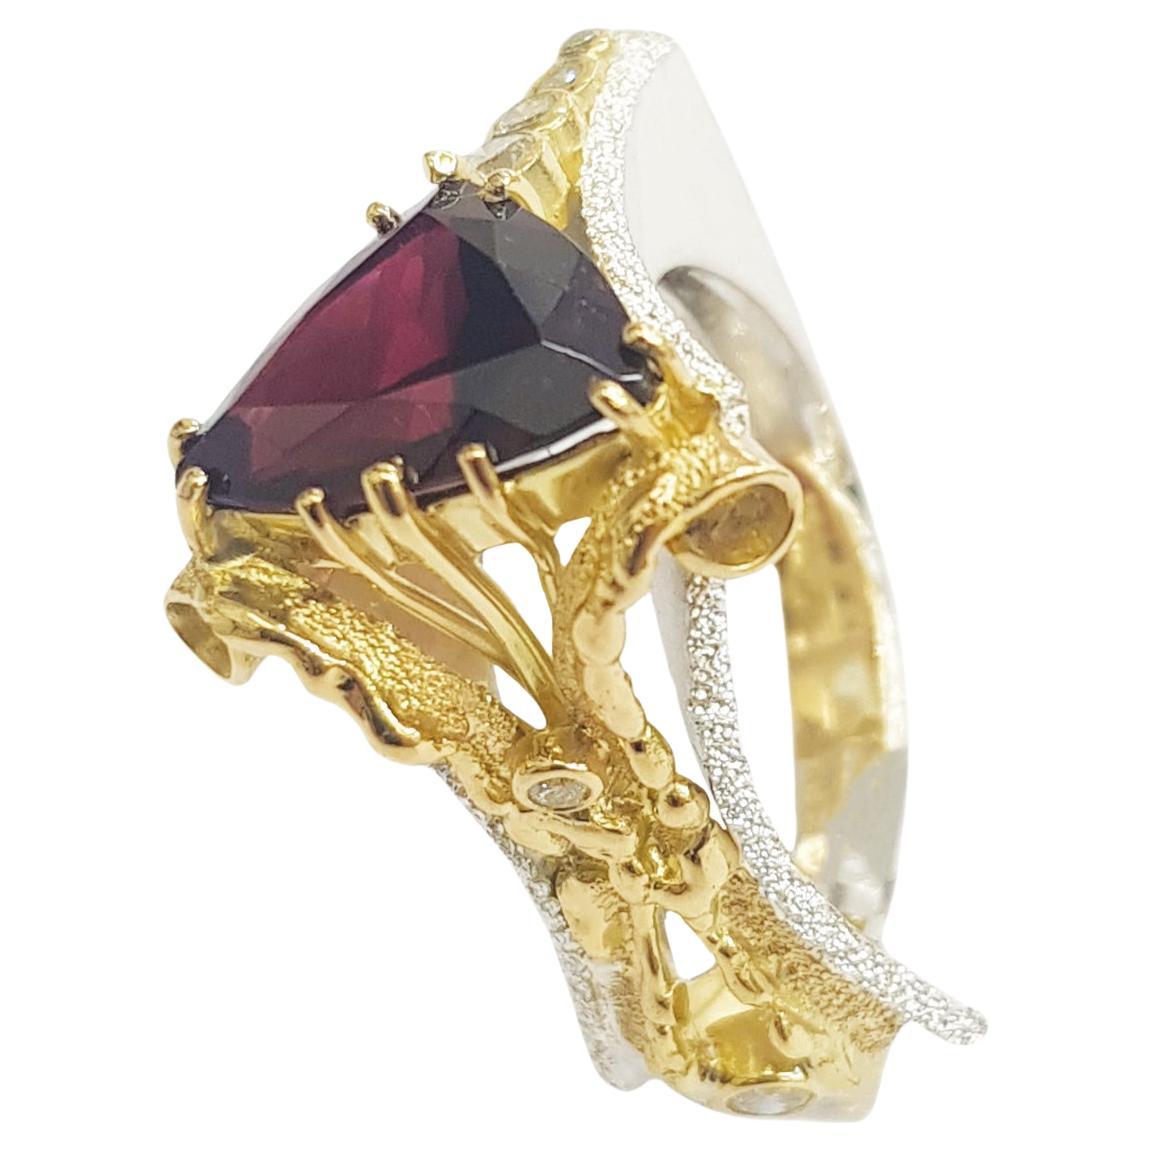 Paul Amey Sterling Silver, 18K Gold, Garnet and Diamond "Wedge" Ring For Sale